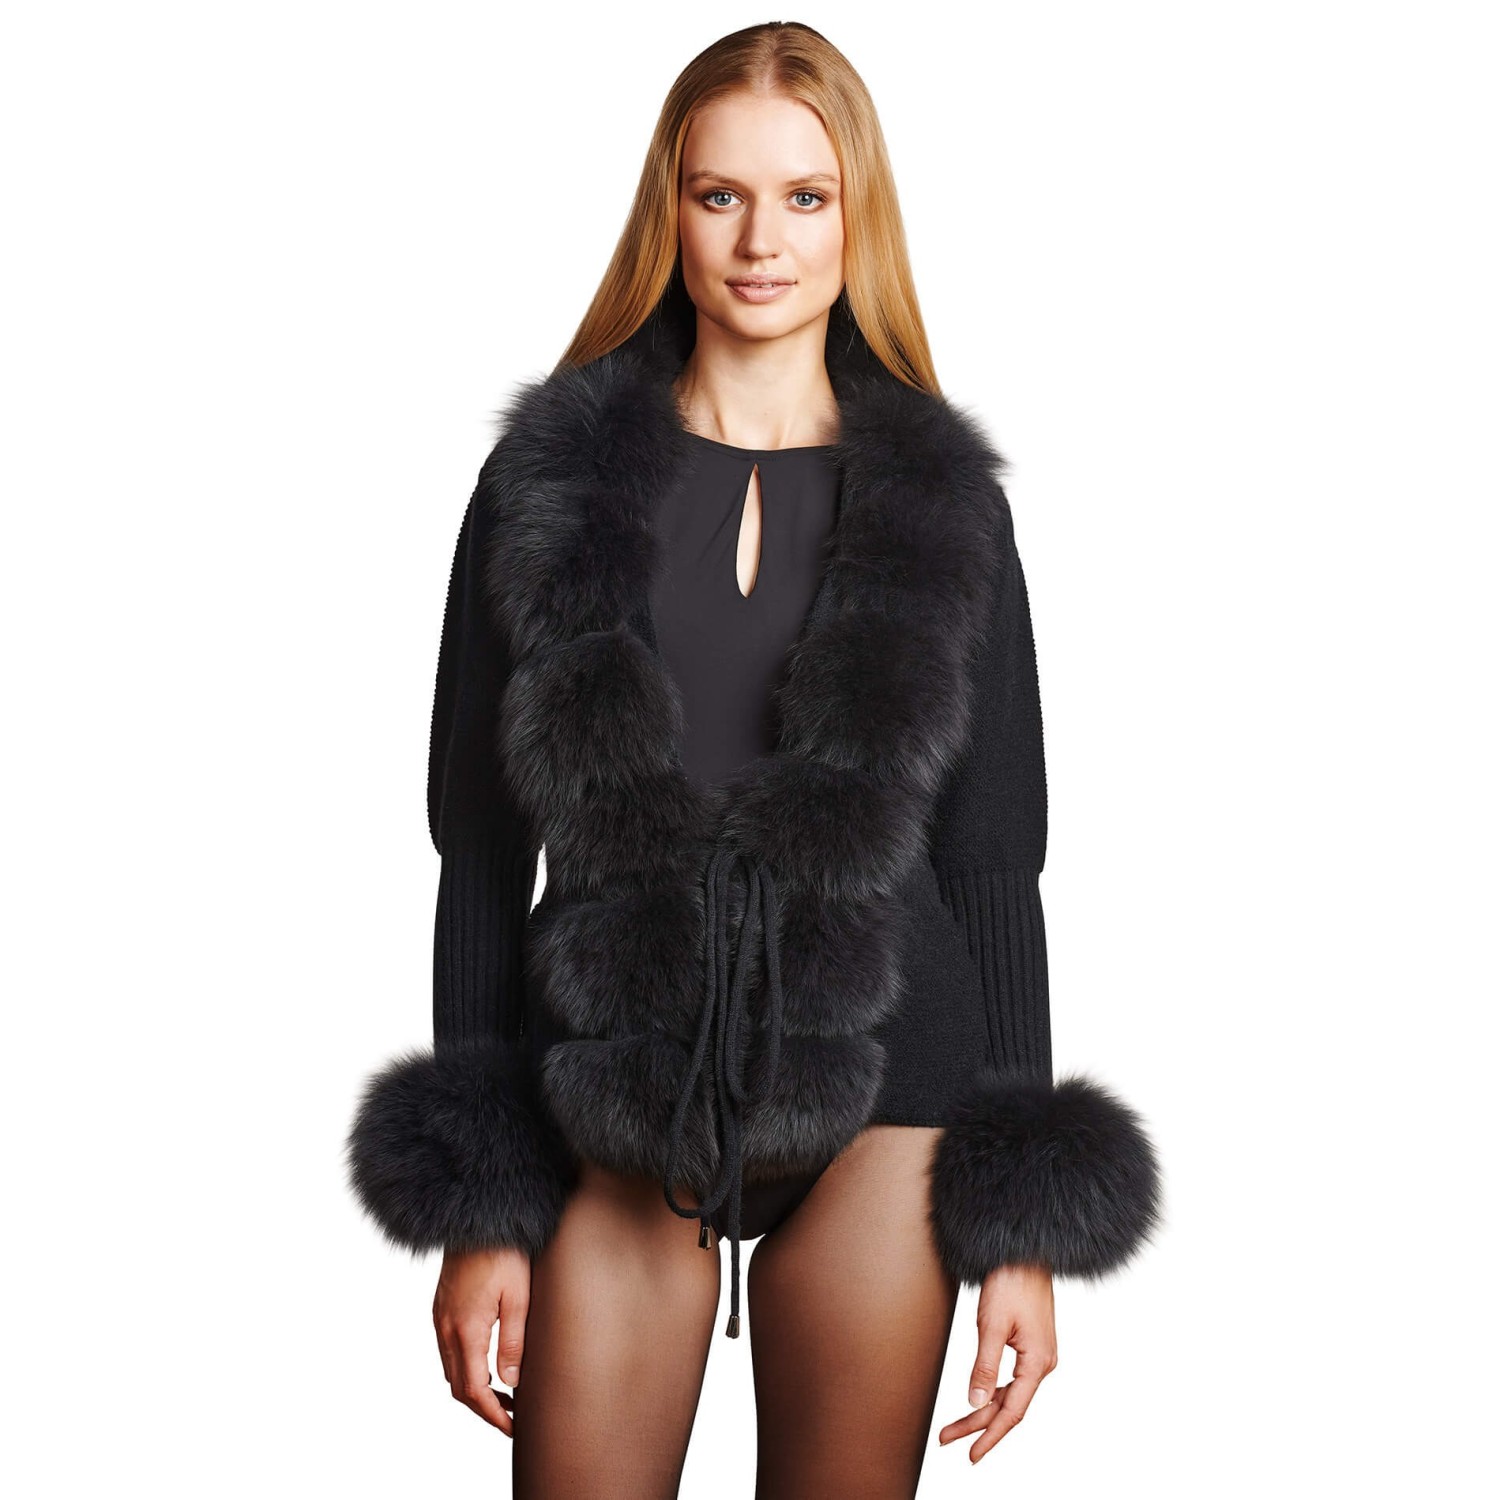 Jacket with Fur cuffs and fur collar